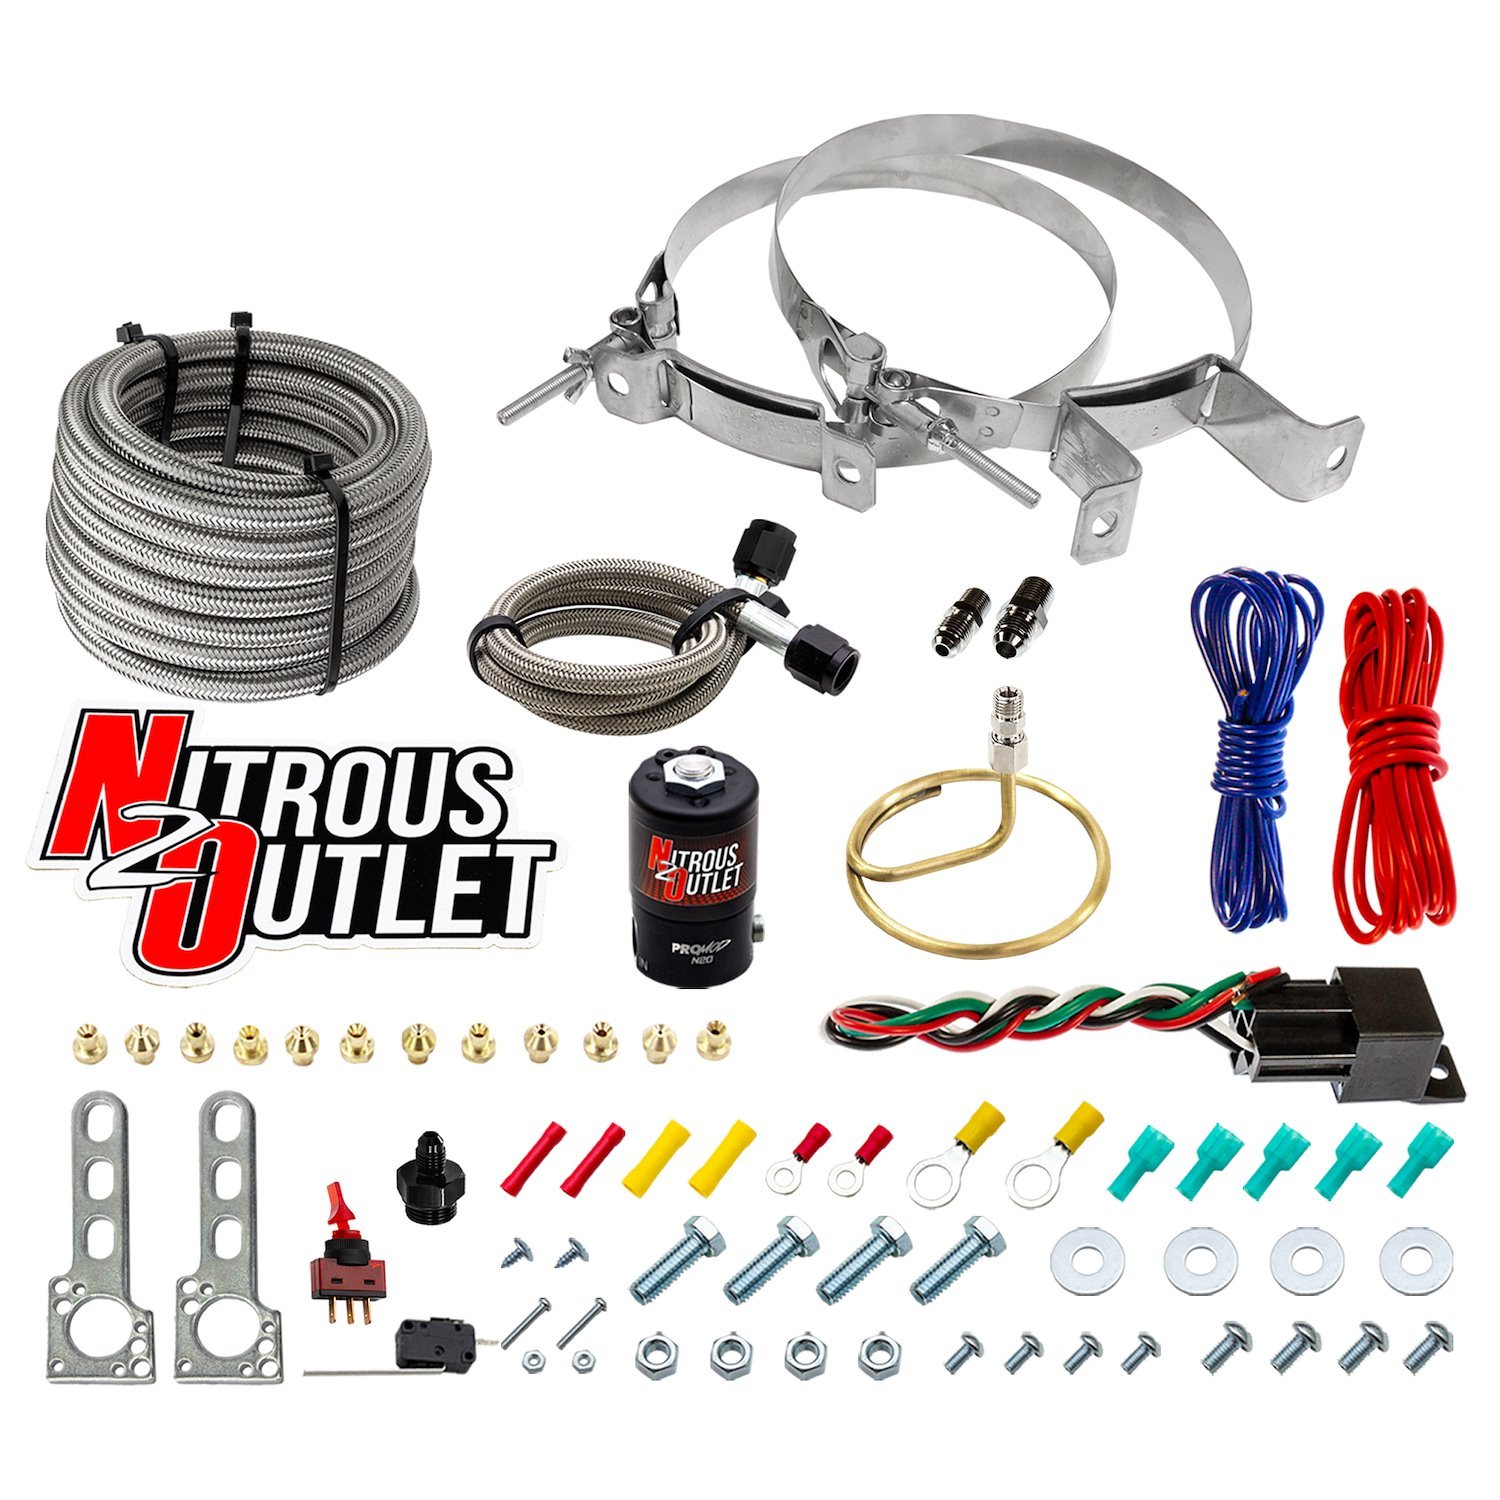 00-10202-00 Universal EFI Dry Small Distribution Ring System, 35-200HP, No Bottle